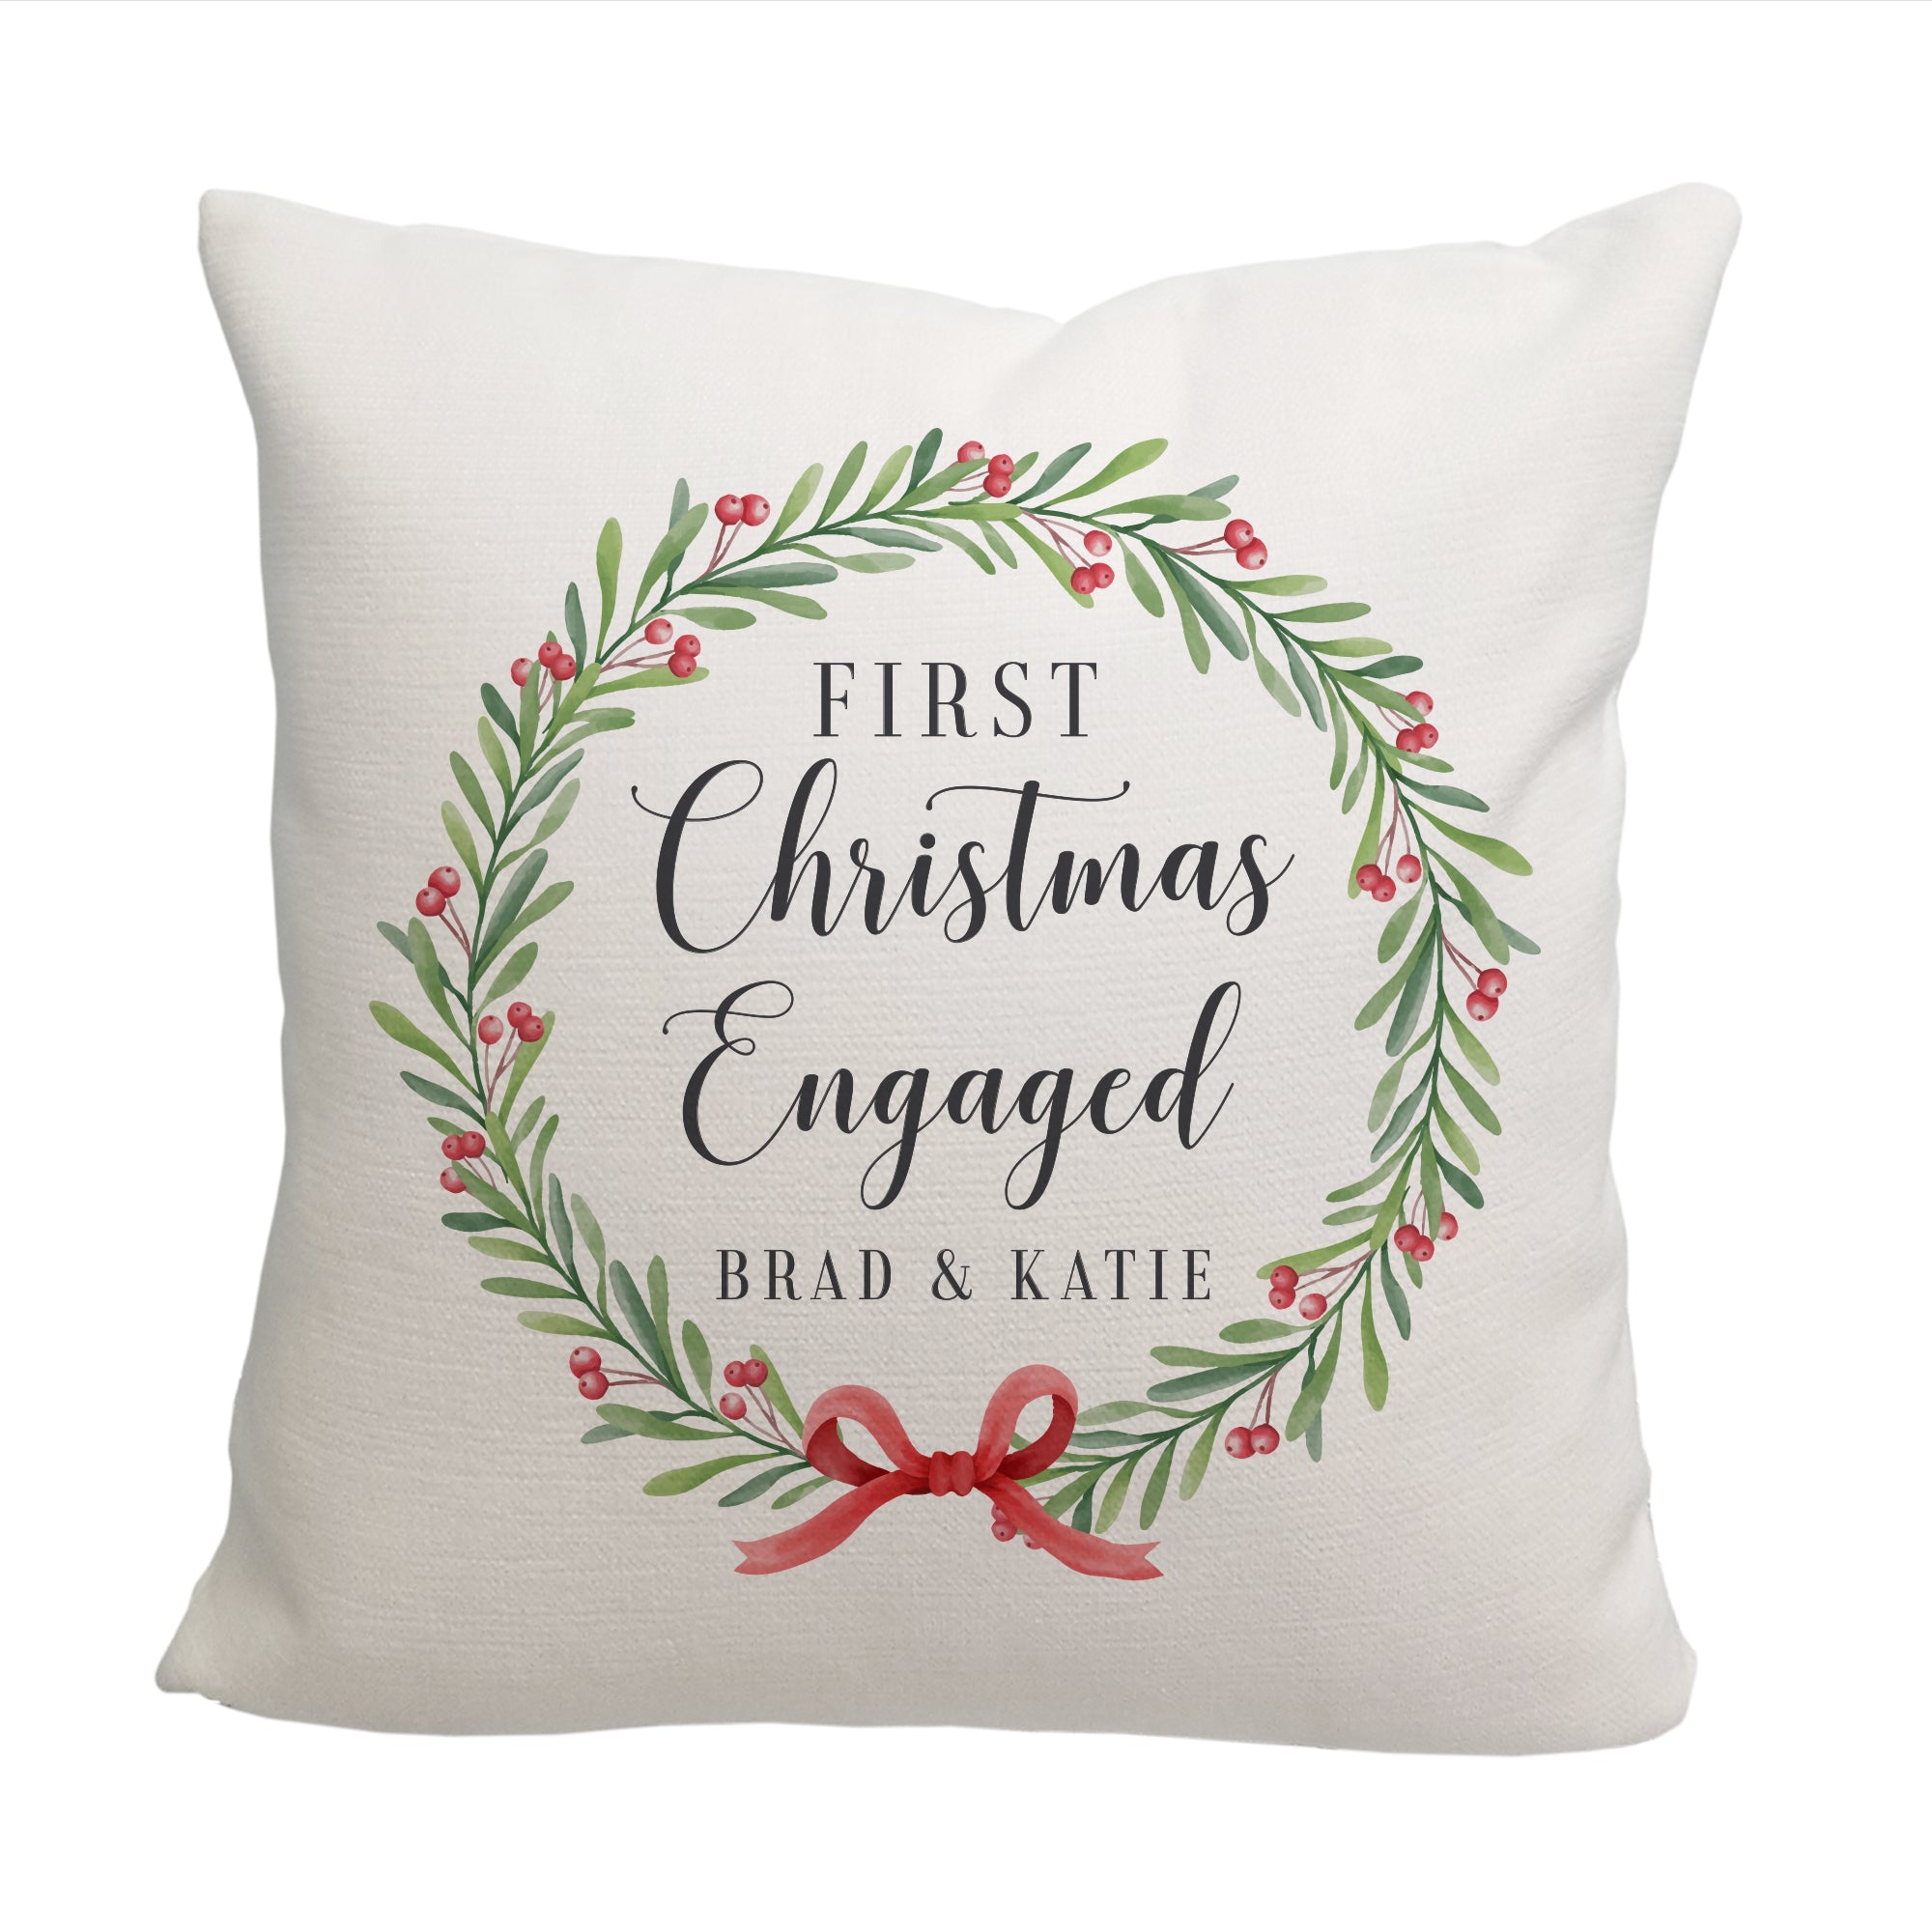 First Christmas Engaged Pillow - Cover Only OR Cover with Inserts